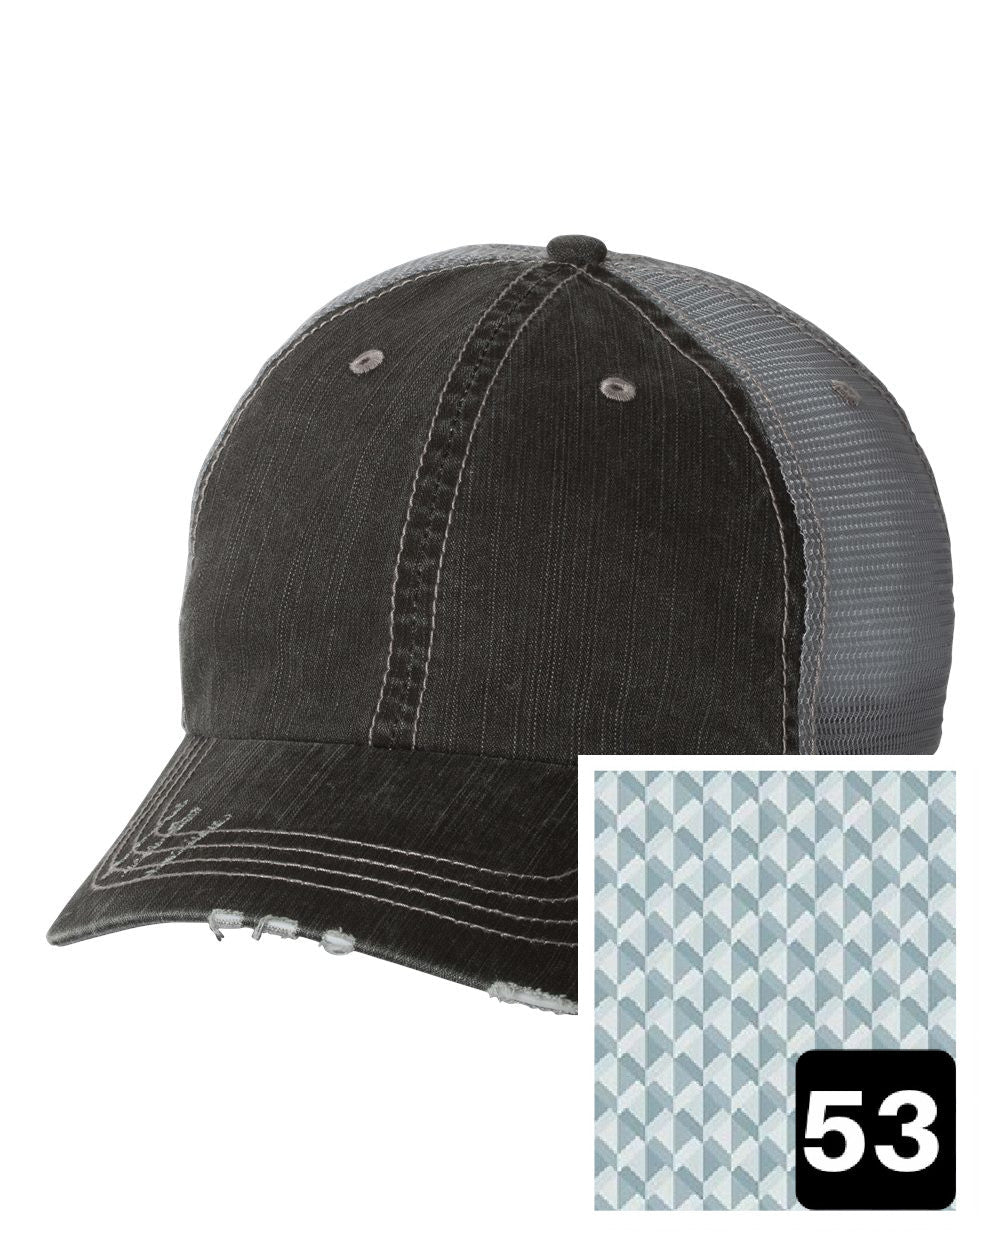 gray distressed trucker hat with multi-color stripe fabric state of West Virginia